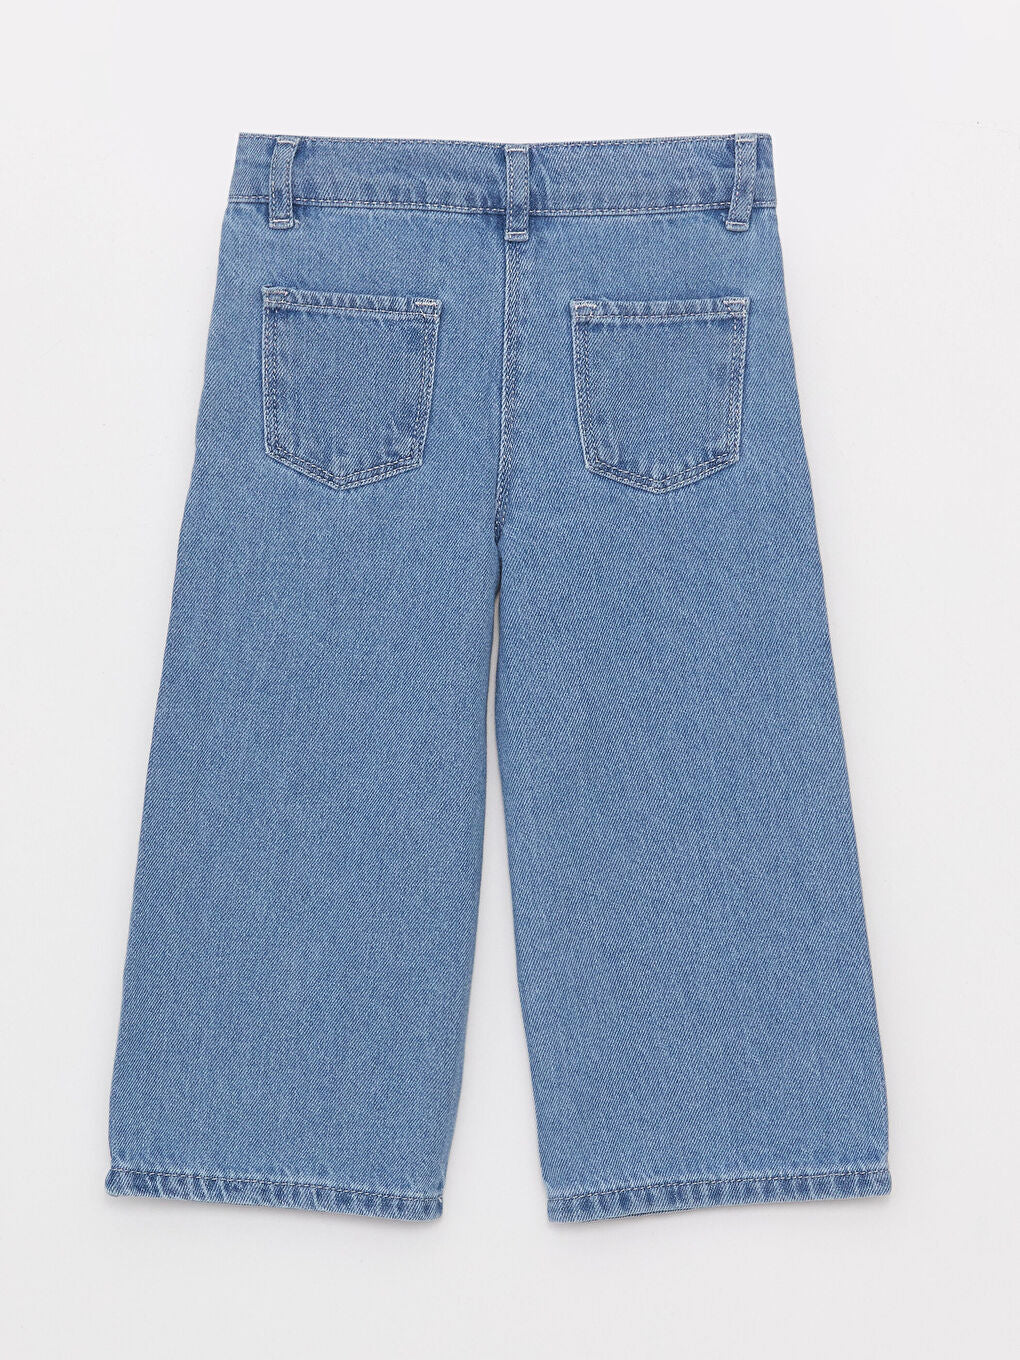 Embroidery Detailed Baby Girl Jean Trousers